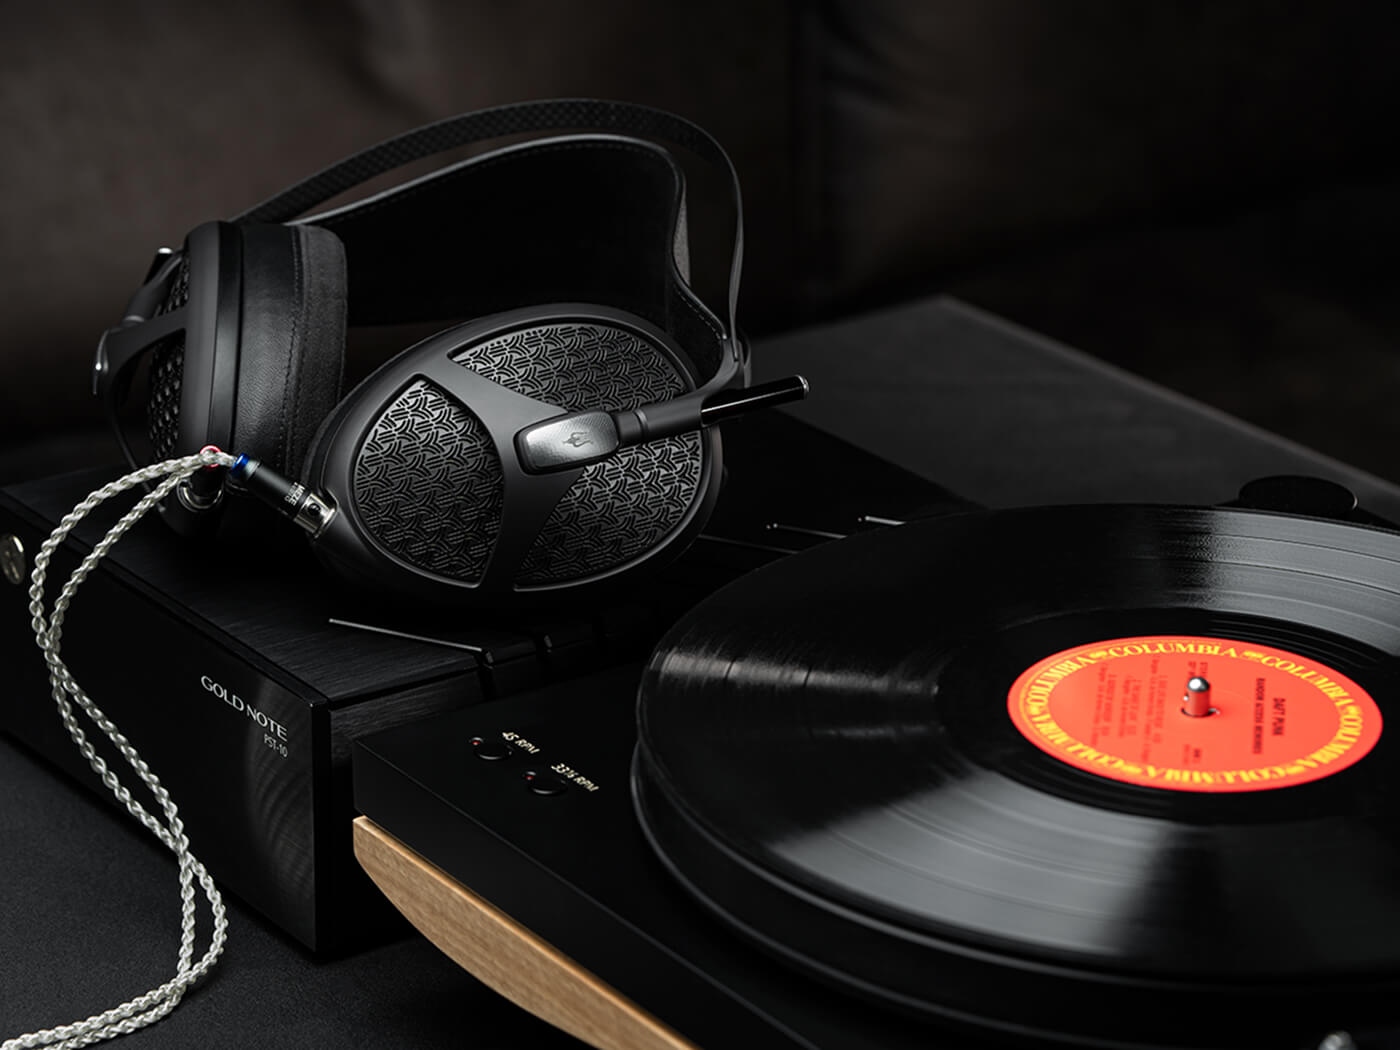 The Empyrean IIs with a turntable